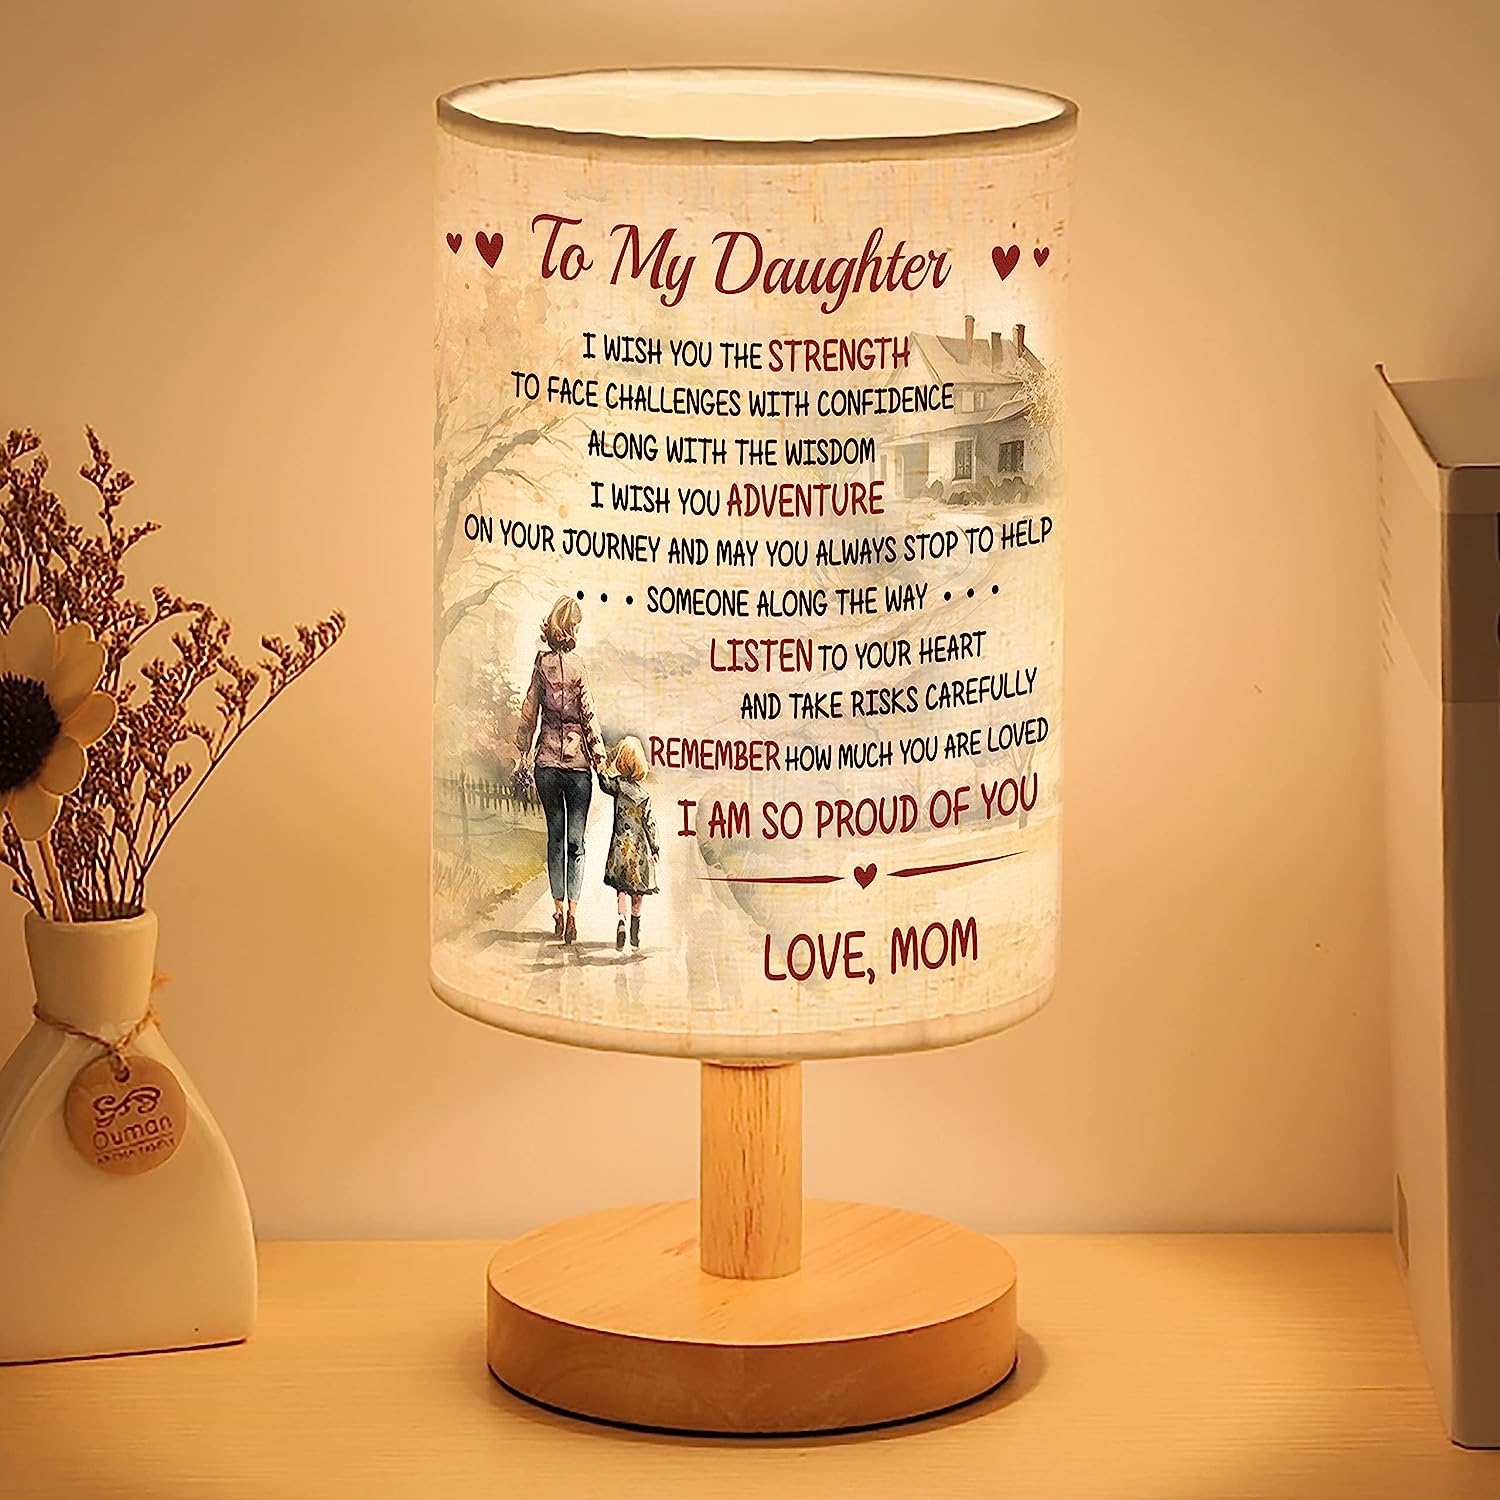 FG Family Gift Mall Daughter Gifts From Mom, Gifts India | Ubuy